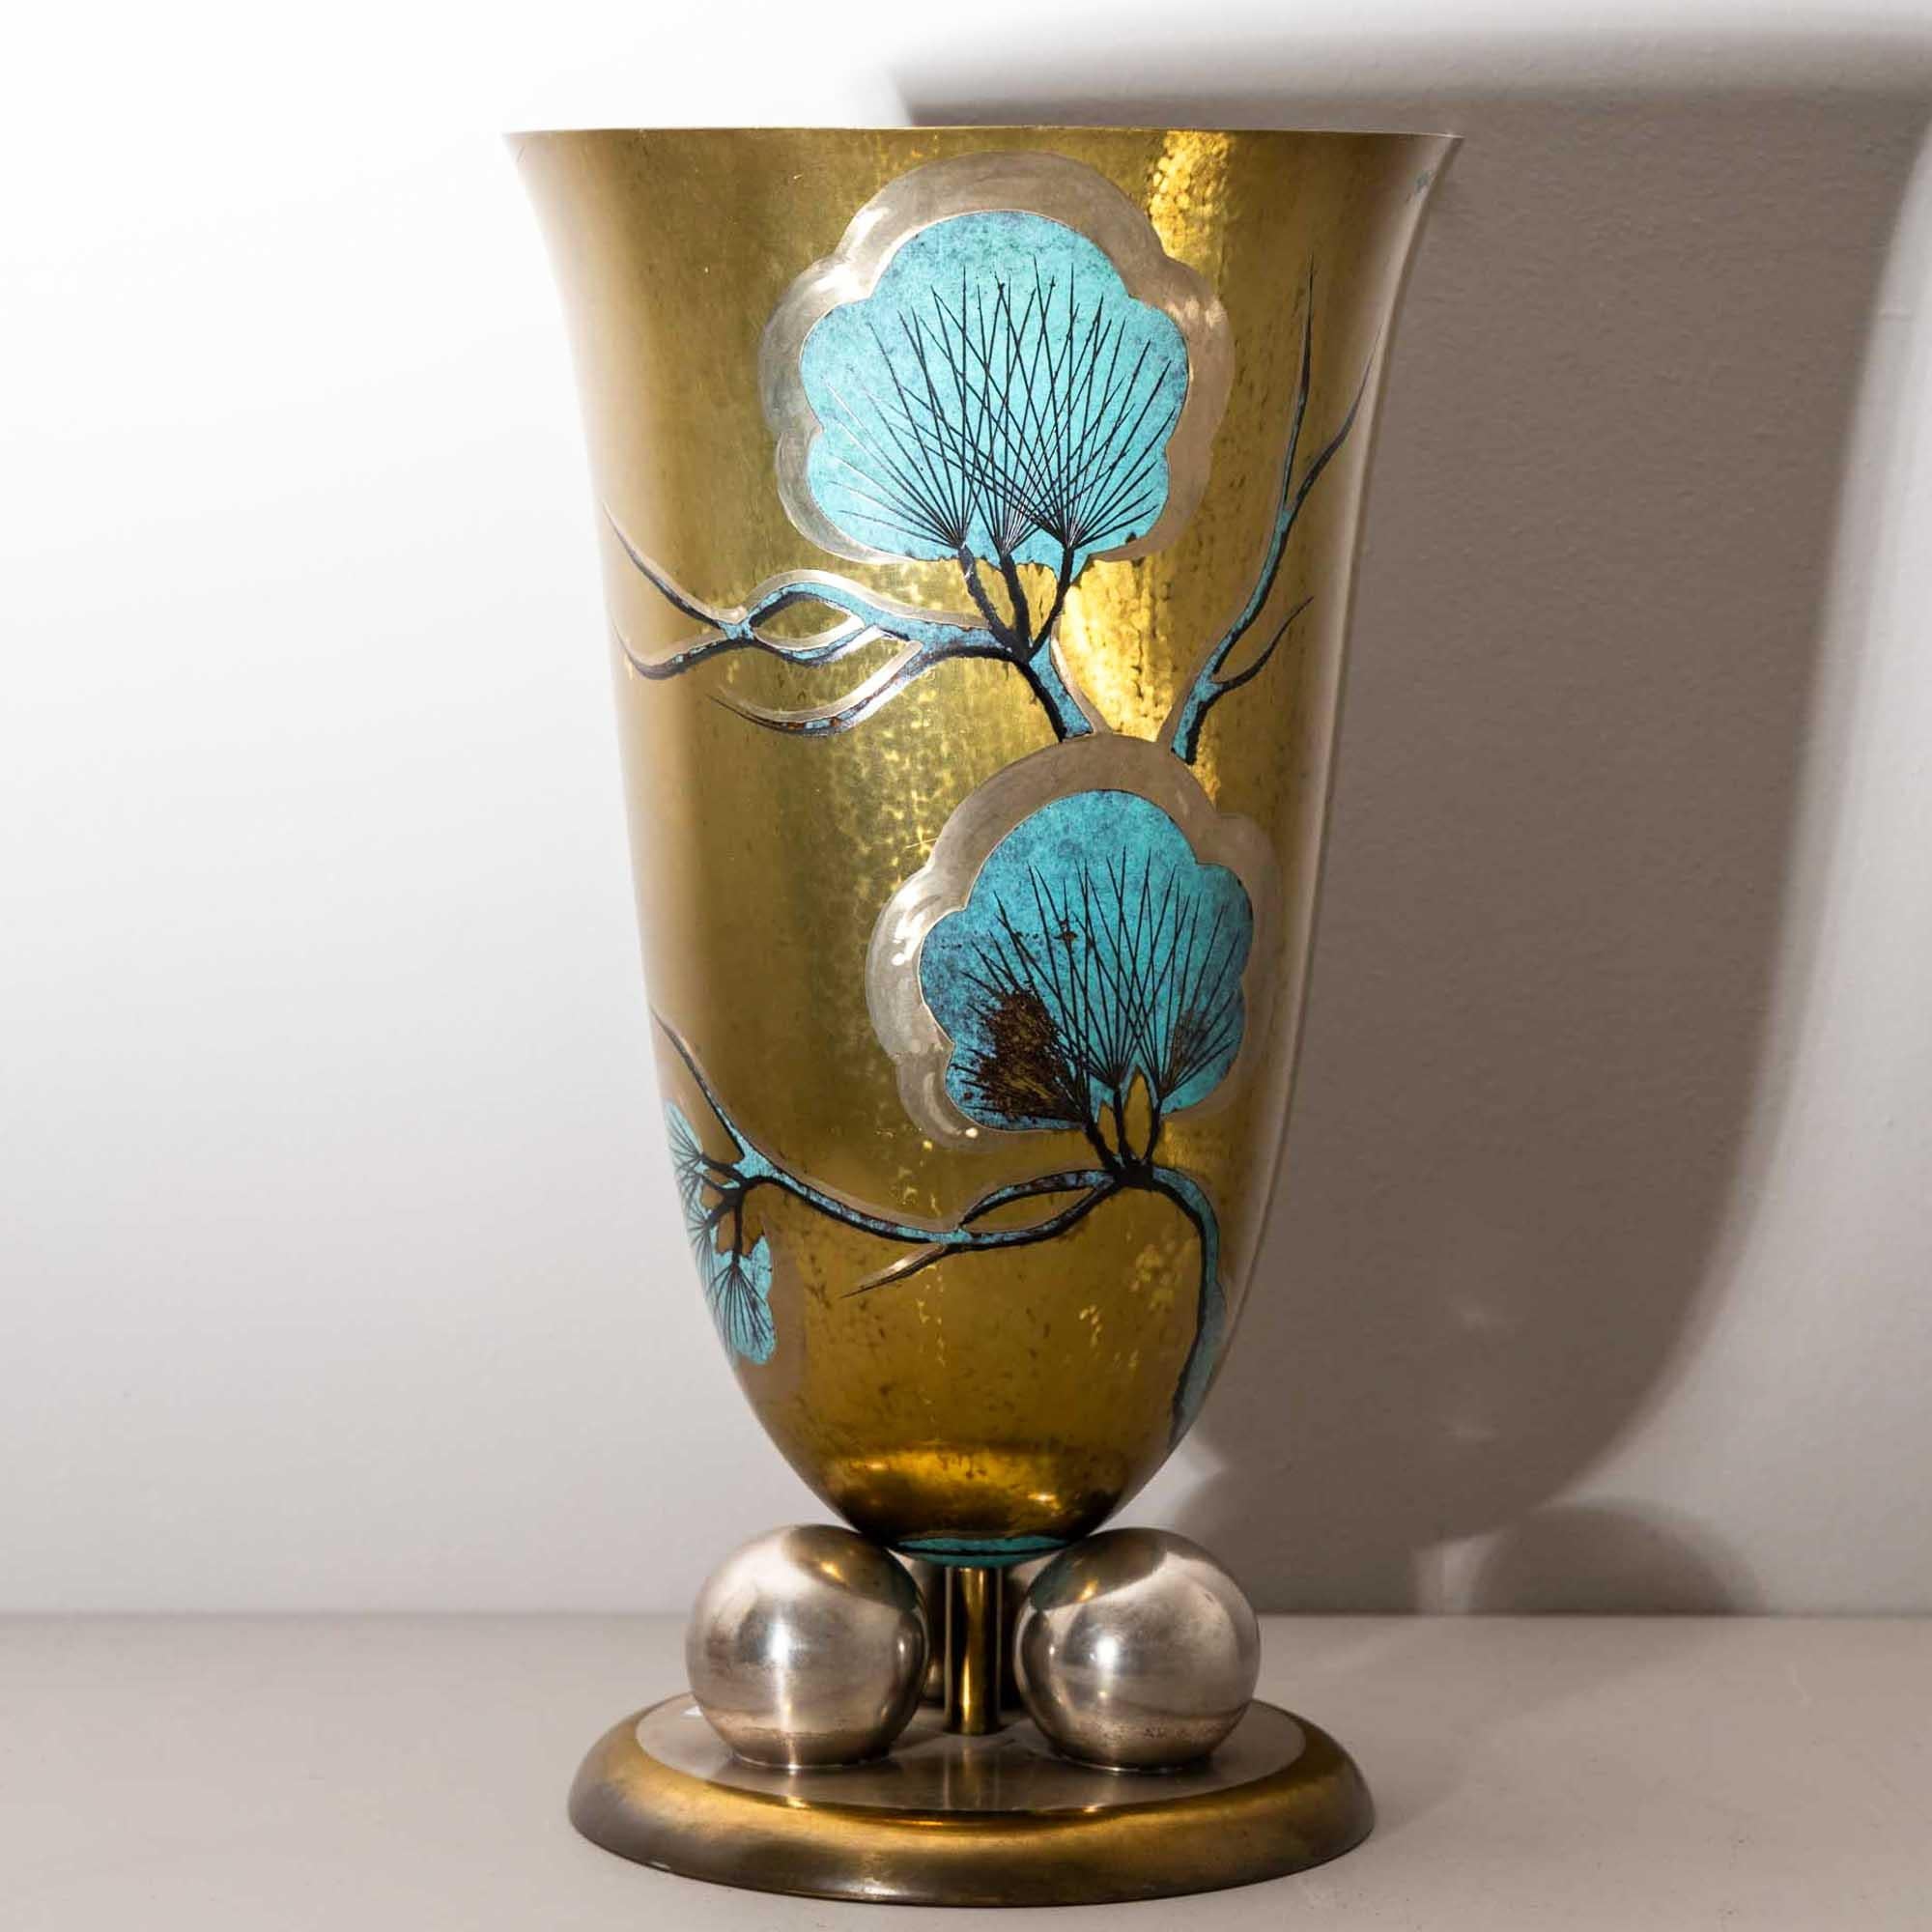 Large WMF vase dating back to the 1920s or 30s. The tulip-shaped vase is elegantly elevated on a round base supported by three spheres. Its gold-ground wall is adorned with turquoise stylized pine branches in an Asian-inspired design, reflecting the